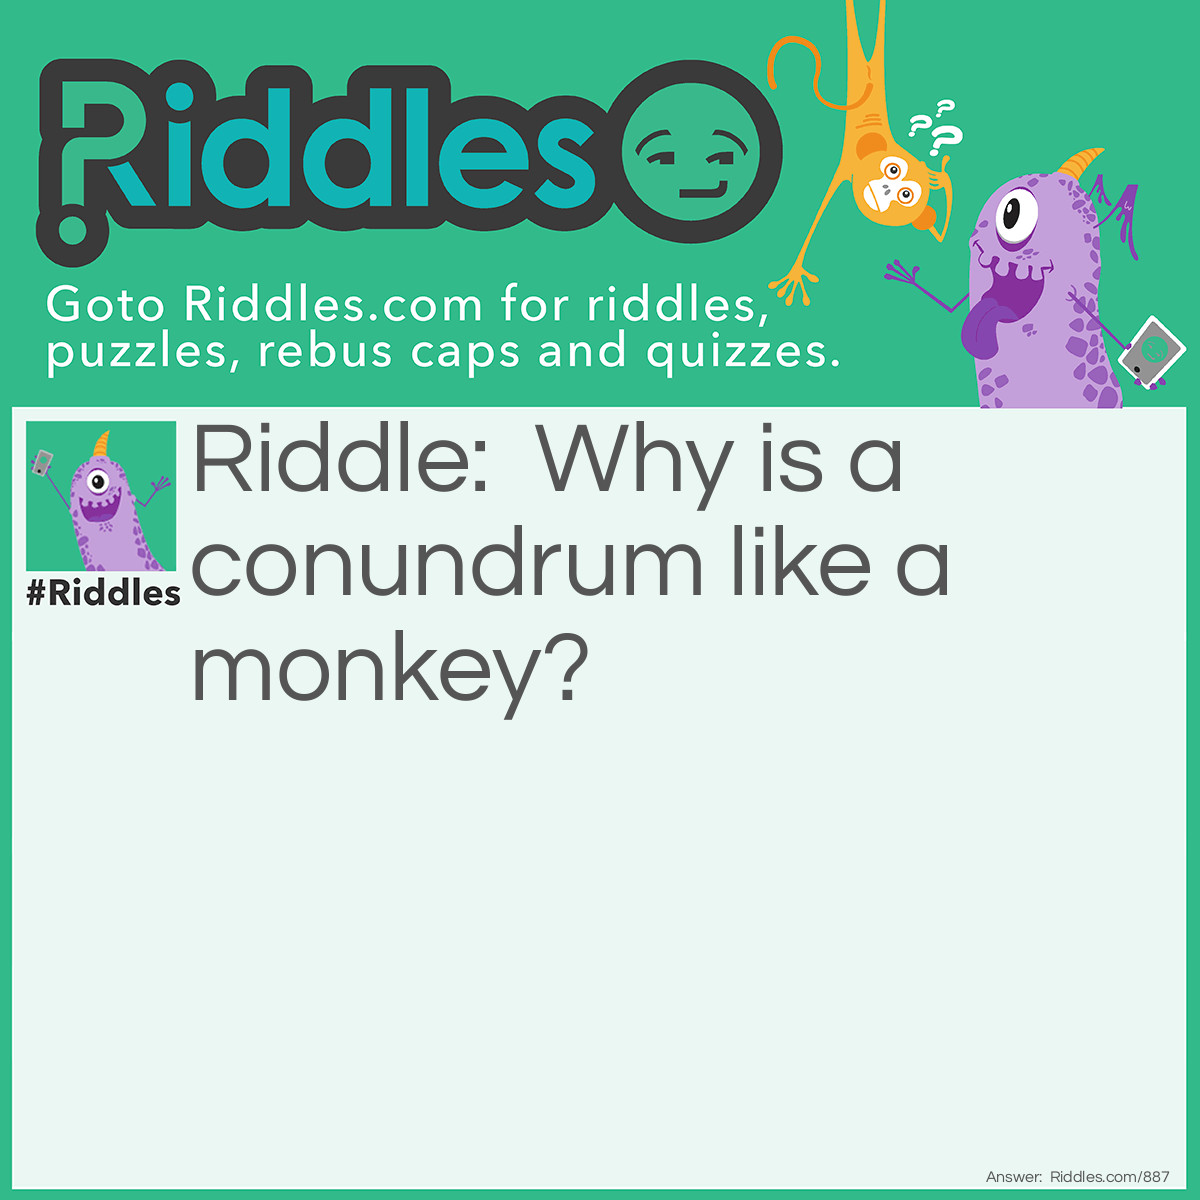 Riddle: Why is a conundrum like a monkey? Answer: Because it is far fetched and full of nonsense.